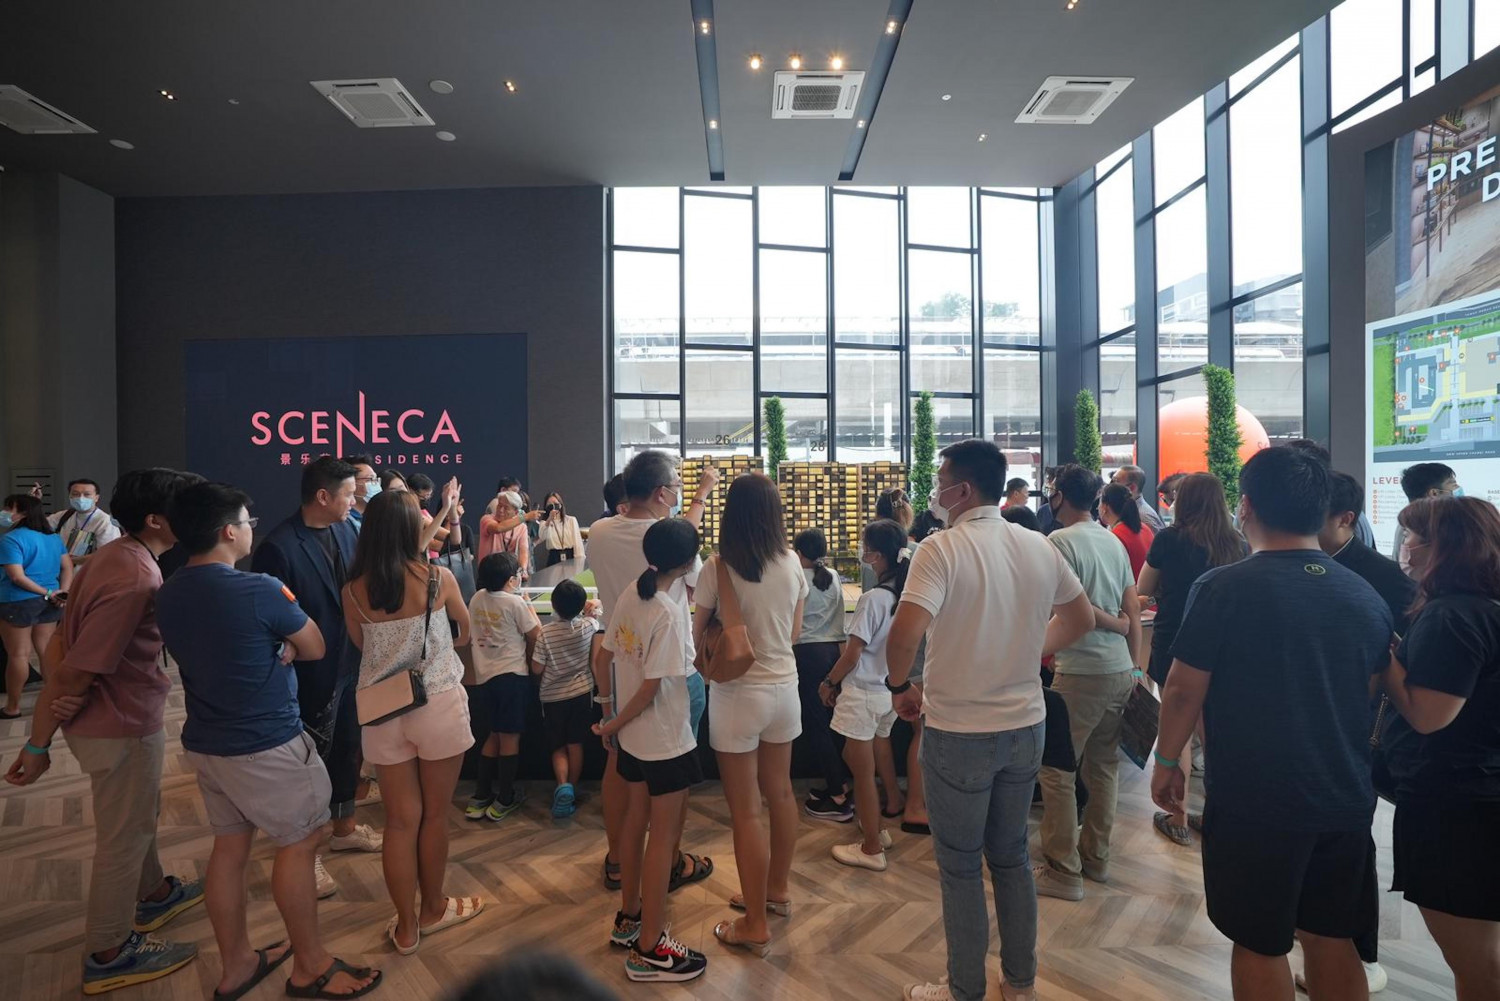 Sceneca Residence draws close to 3,000 visitors on first day of preview - Property News